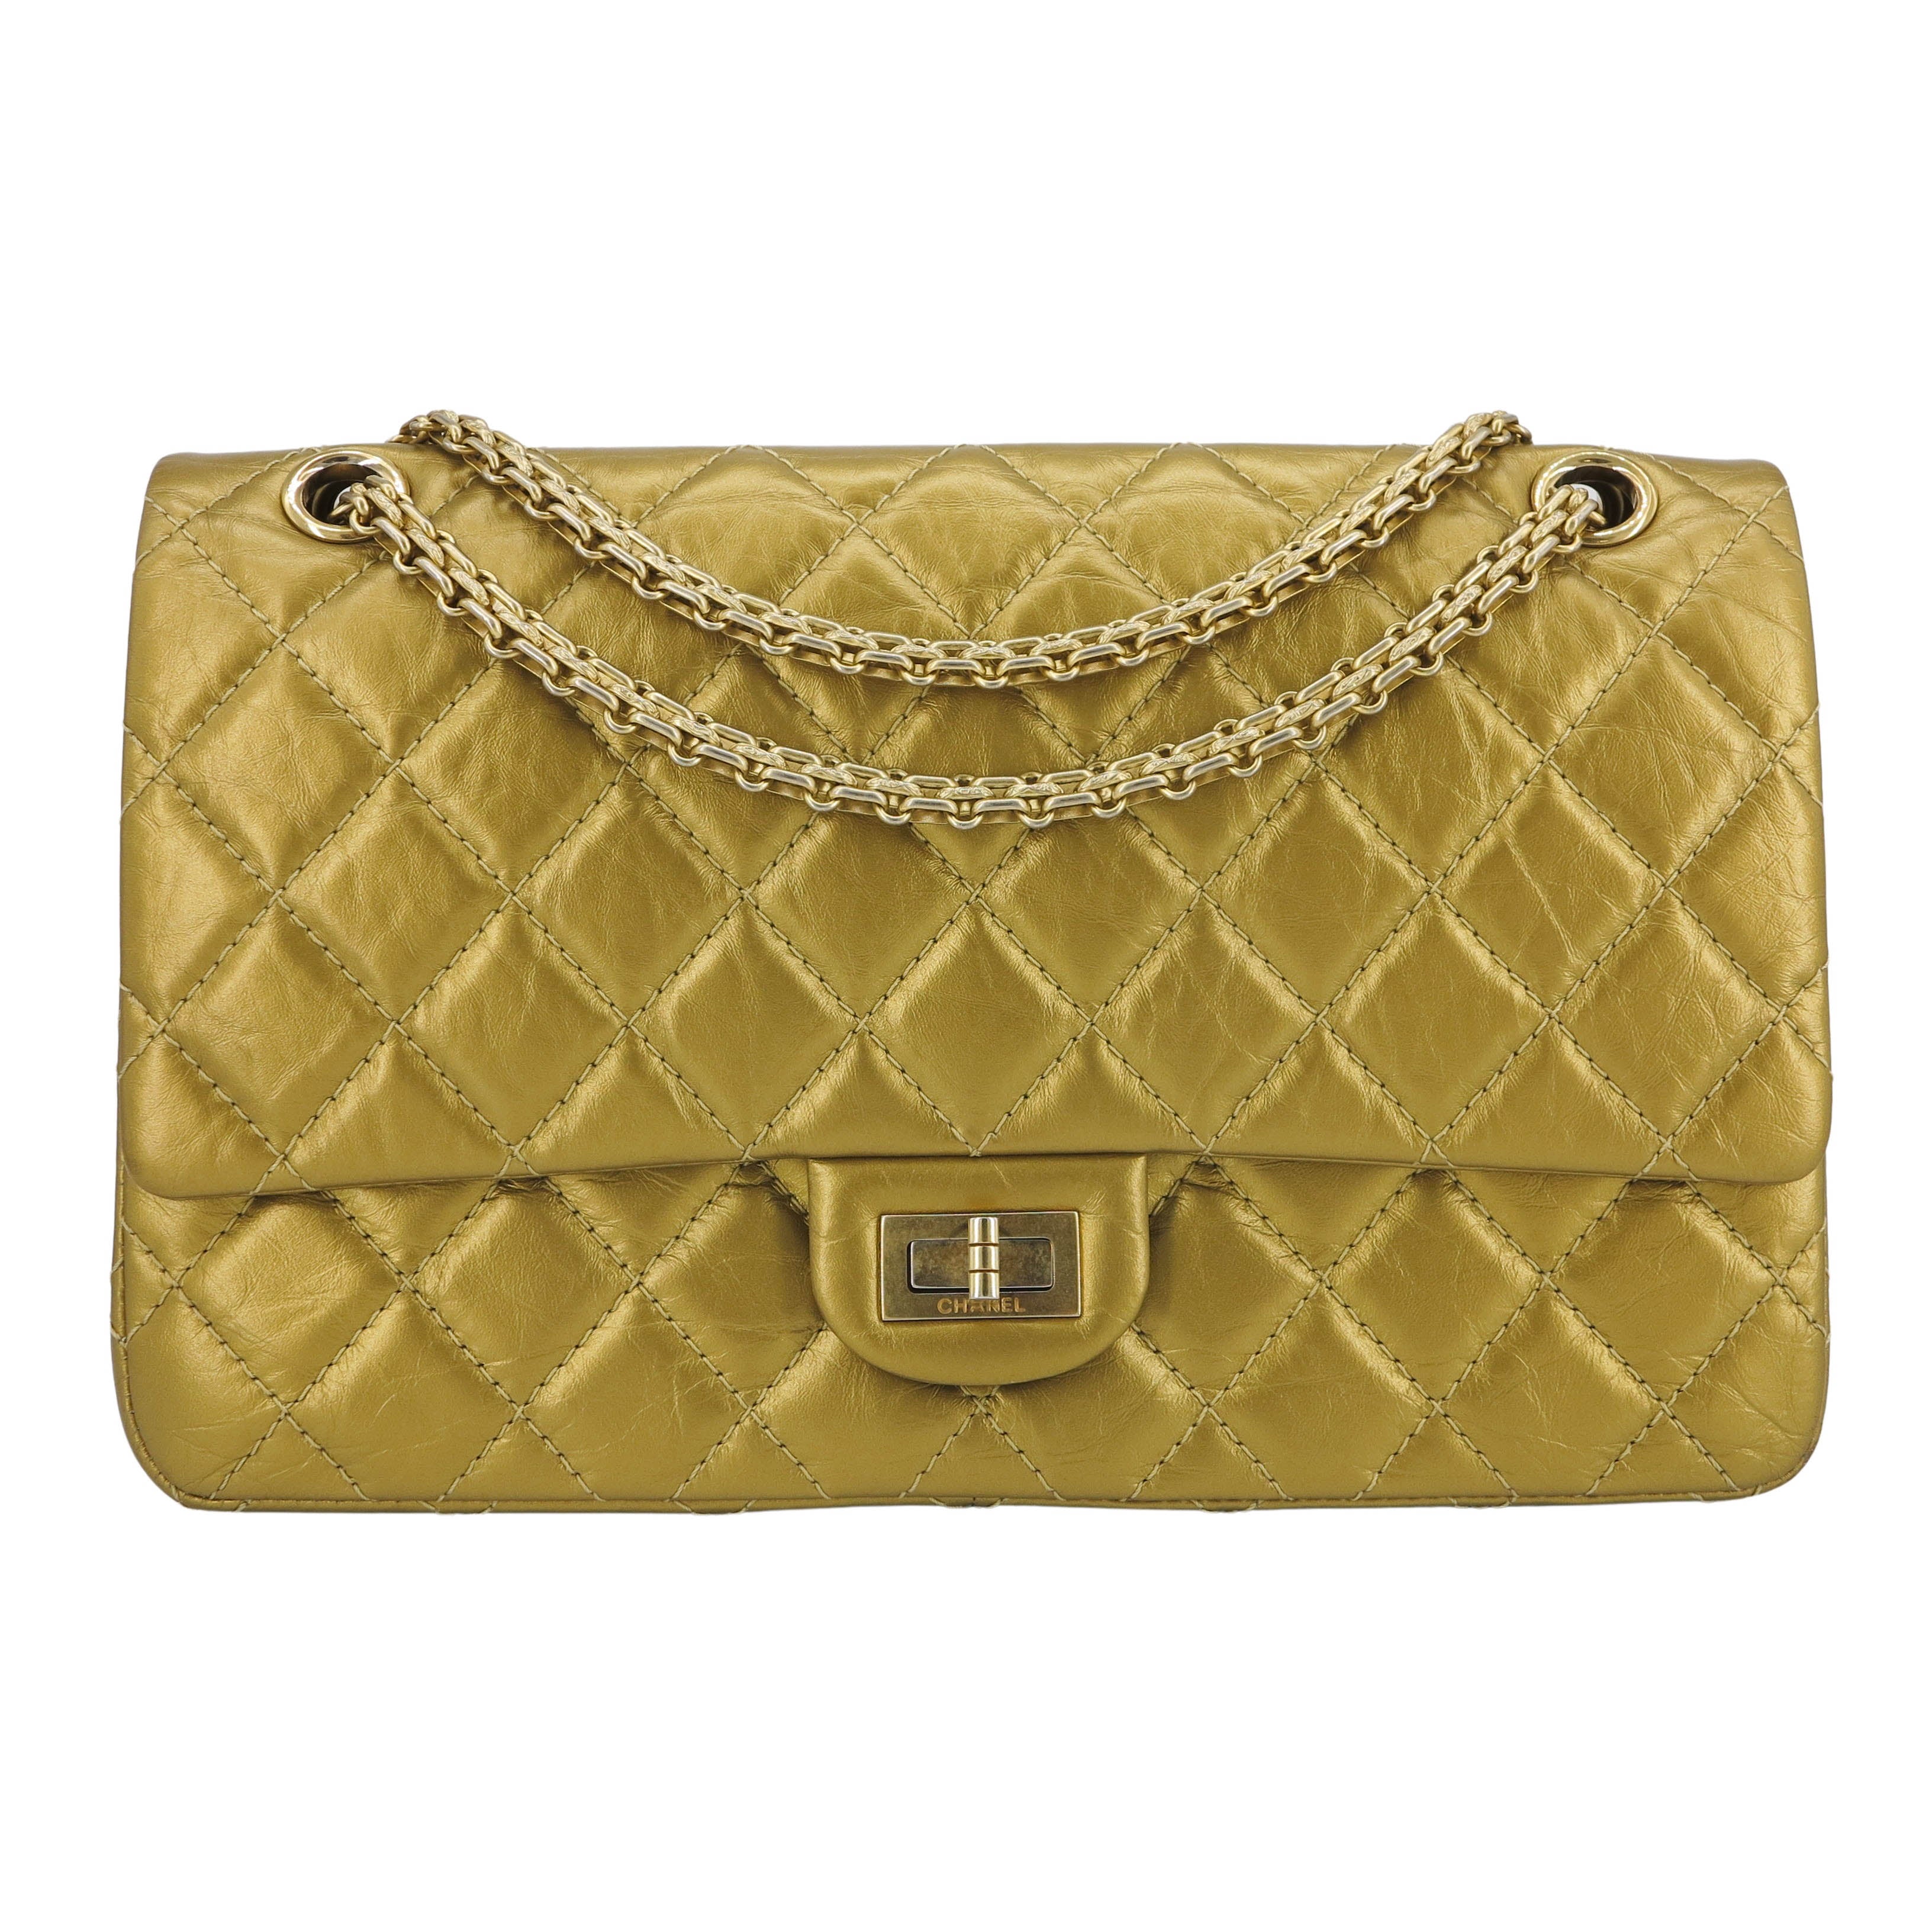 Chanel Reissue 2.55 Flap Bag Quilted Aged Calfskin 226 Pink